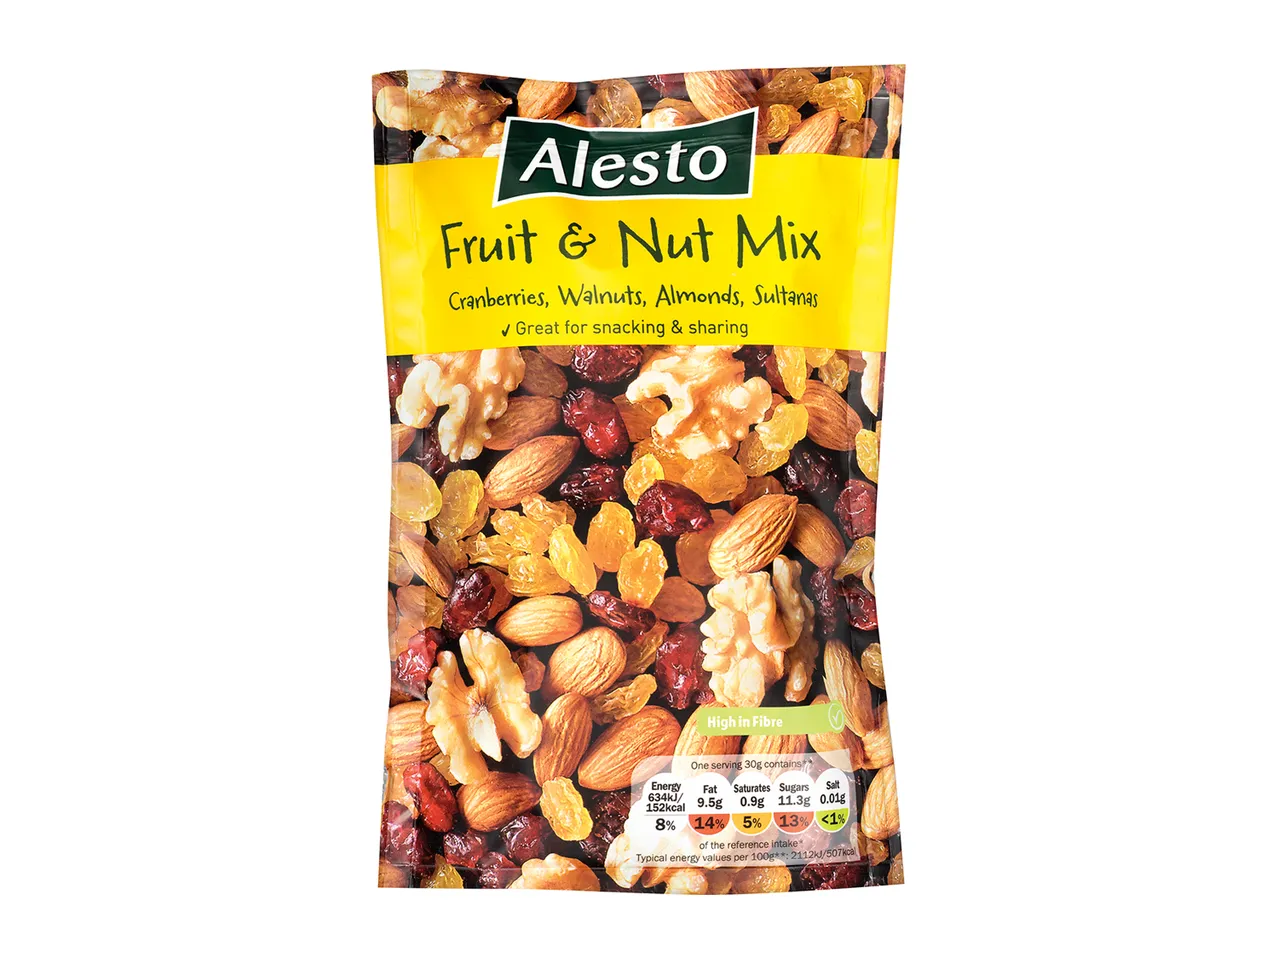 Go to full screen view: Alesto Fruit & Nut Mix - Image 1